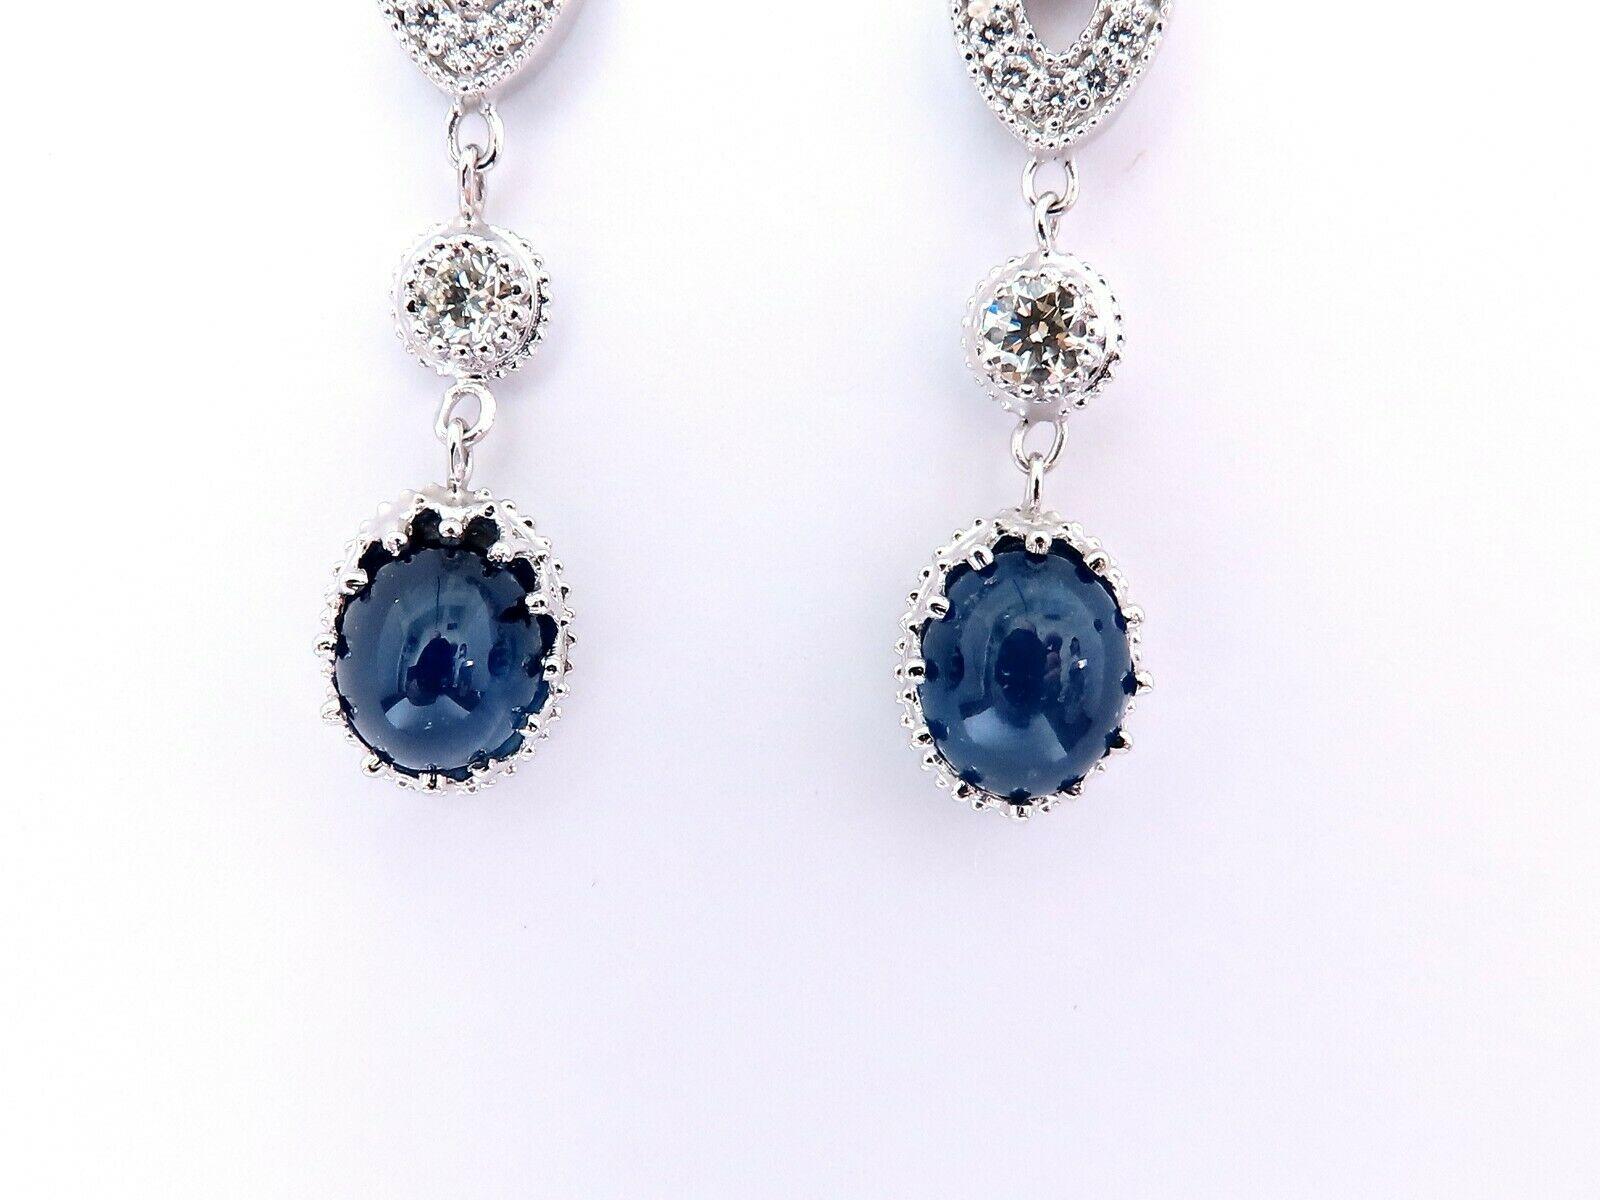 Cabochon dangles statement earrings.

4.33 carat natural oval sapphires.

Royal blue, clean clarity and transparent.

7.5 x 5.5 mm each.

1.10ct natural round diamonds.

G color vs2 clarity

14kt white gold 7.8 grams.

$8,000 appraisal certificate